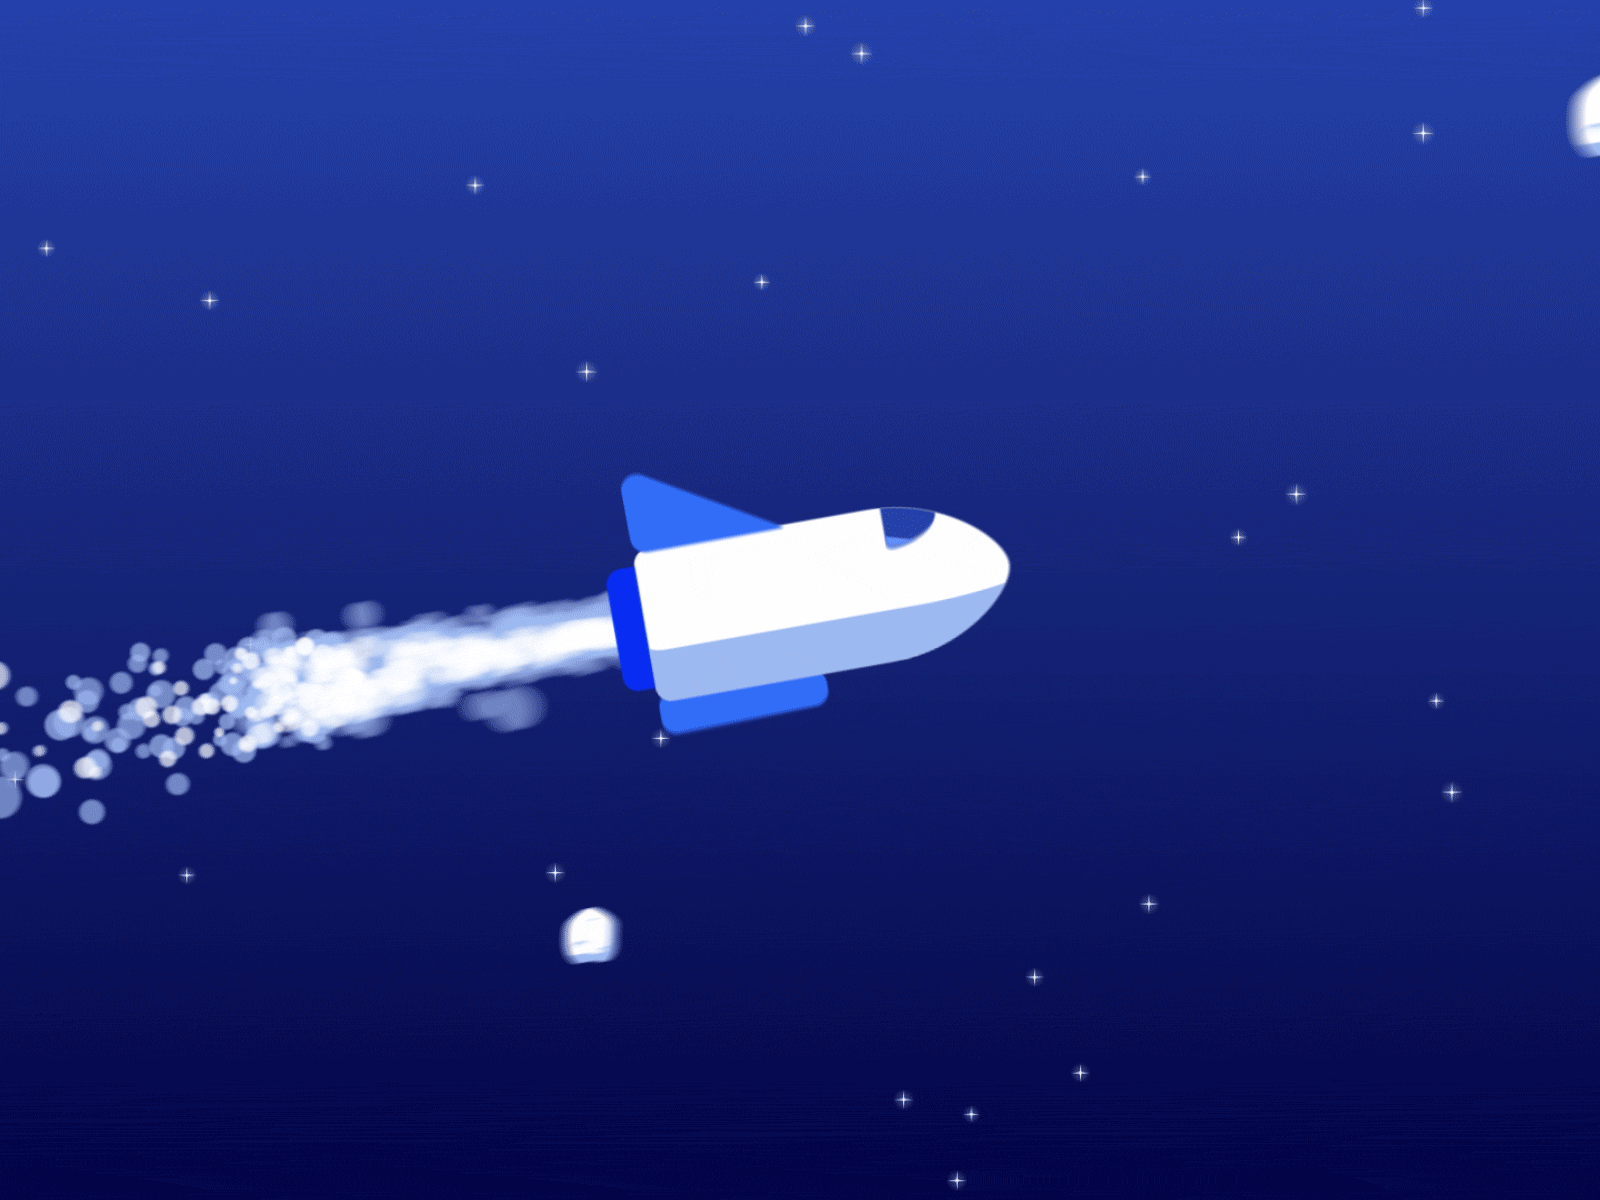 Rocket 2.5D Animation 2.5d after effects animation rocket space